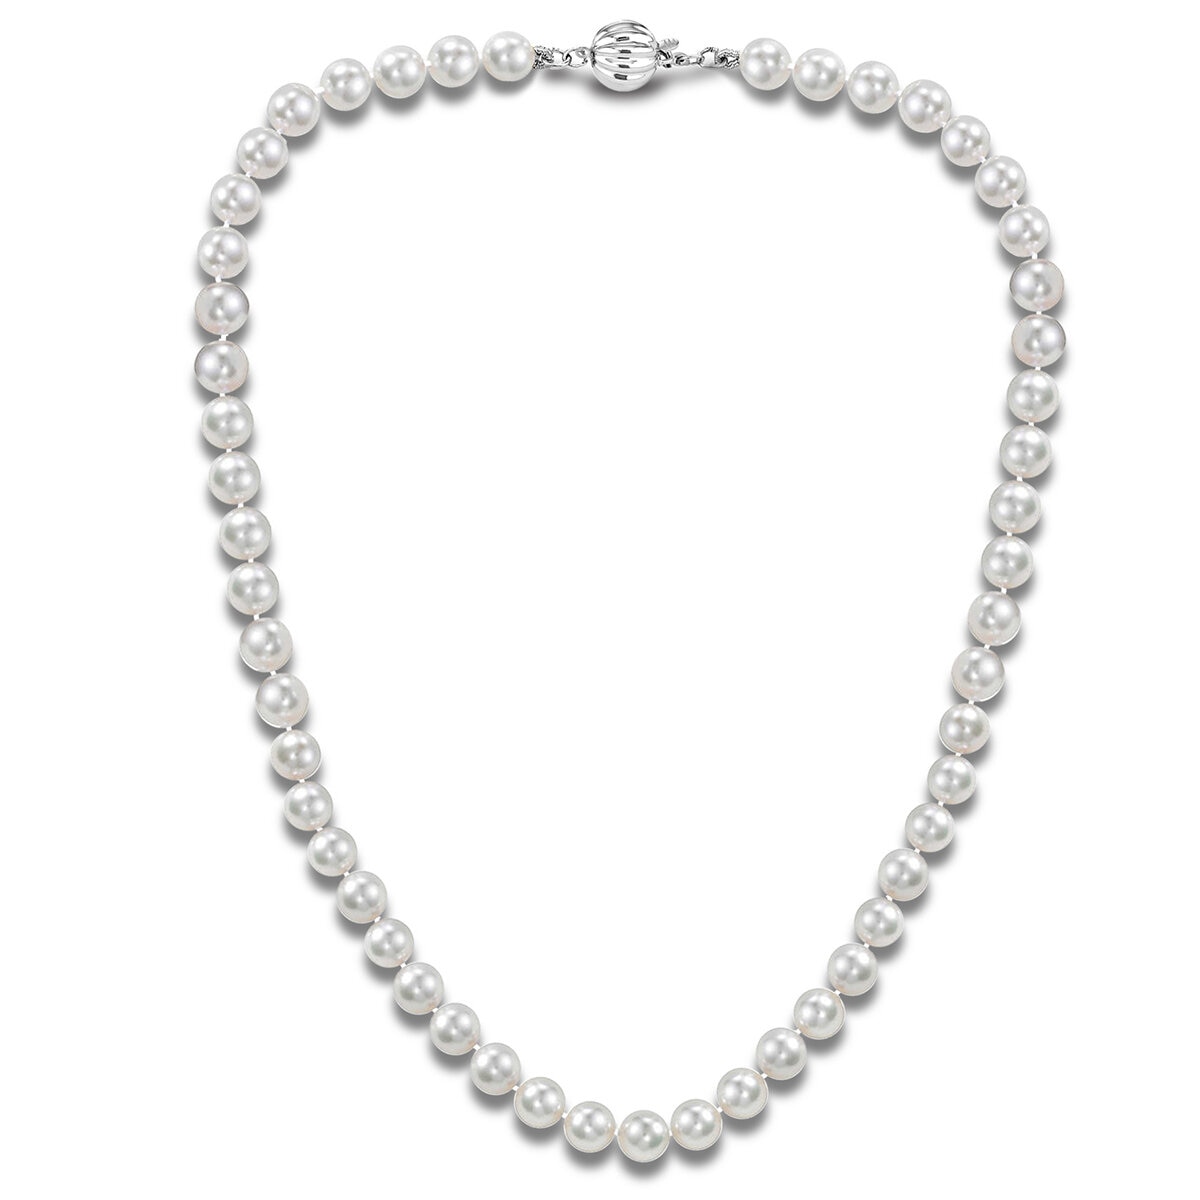 14KT White Gold With 52 Akoya Cultured Pearl 7.5-8mm Neck...